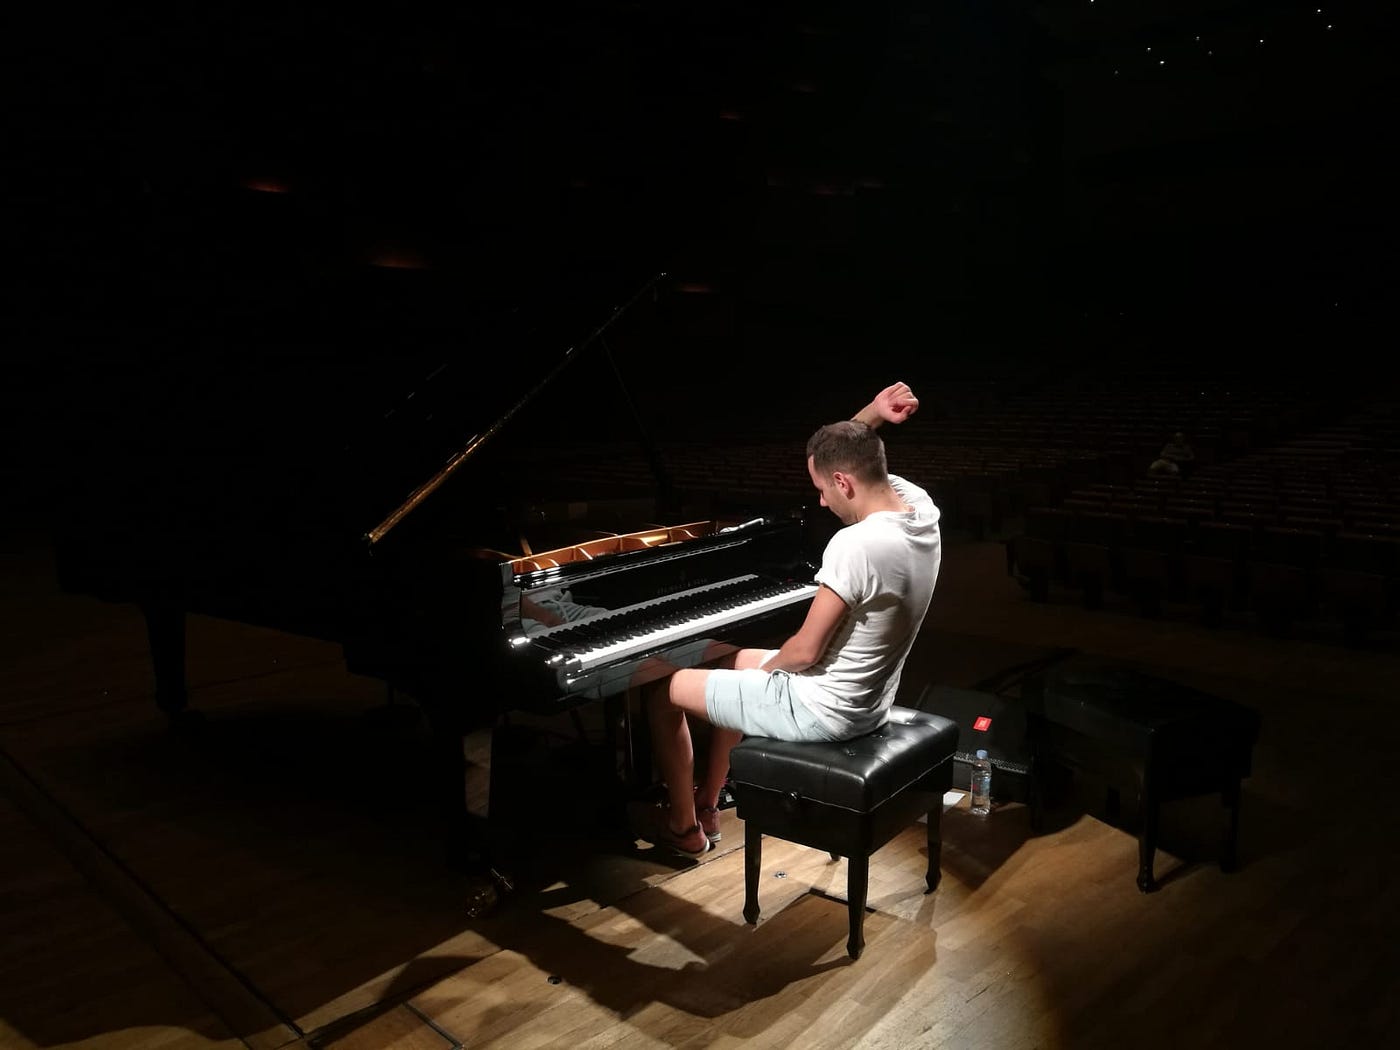 Peter Bence: No Pianos Were Harmed During My Performance | by Sara Tilly |  Medium